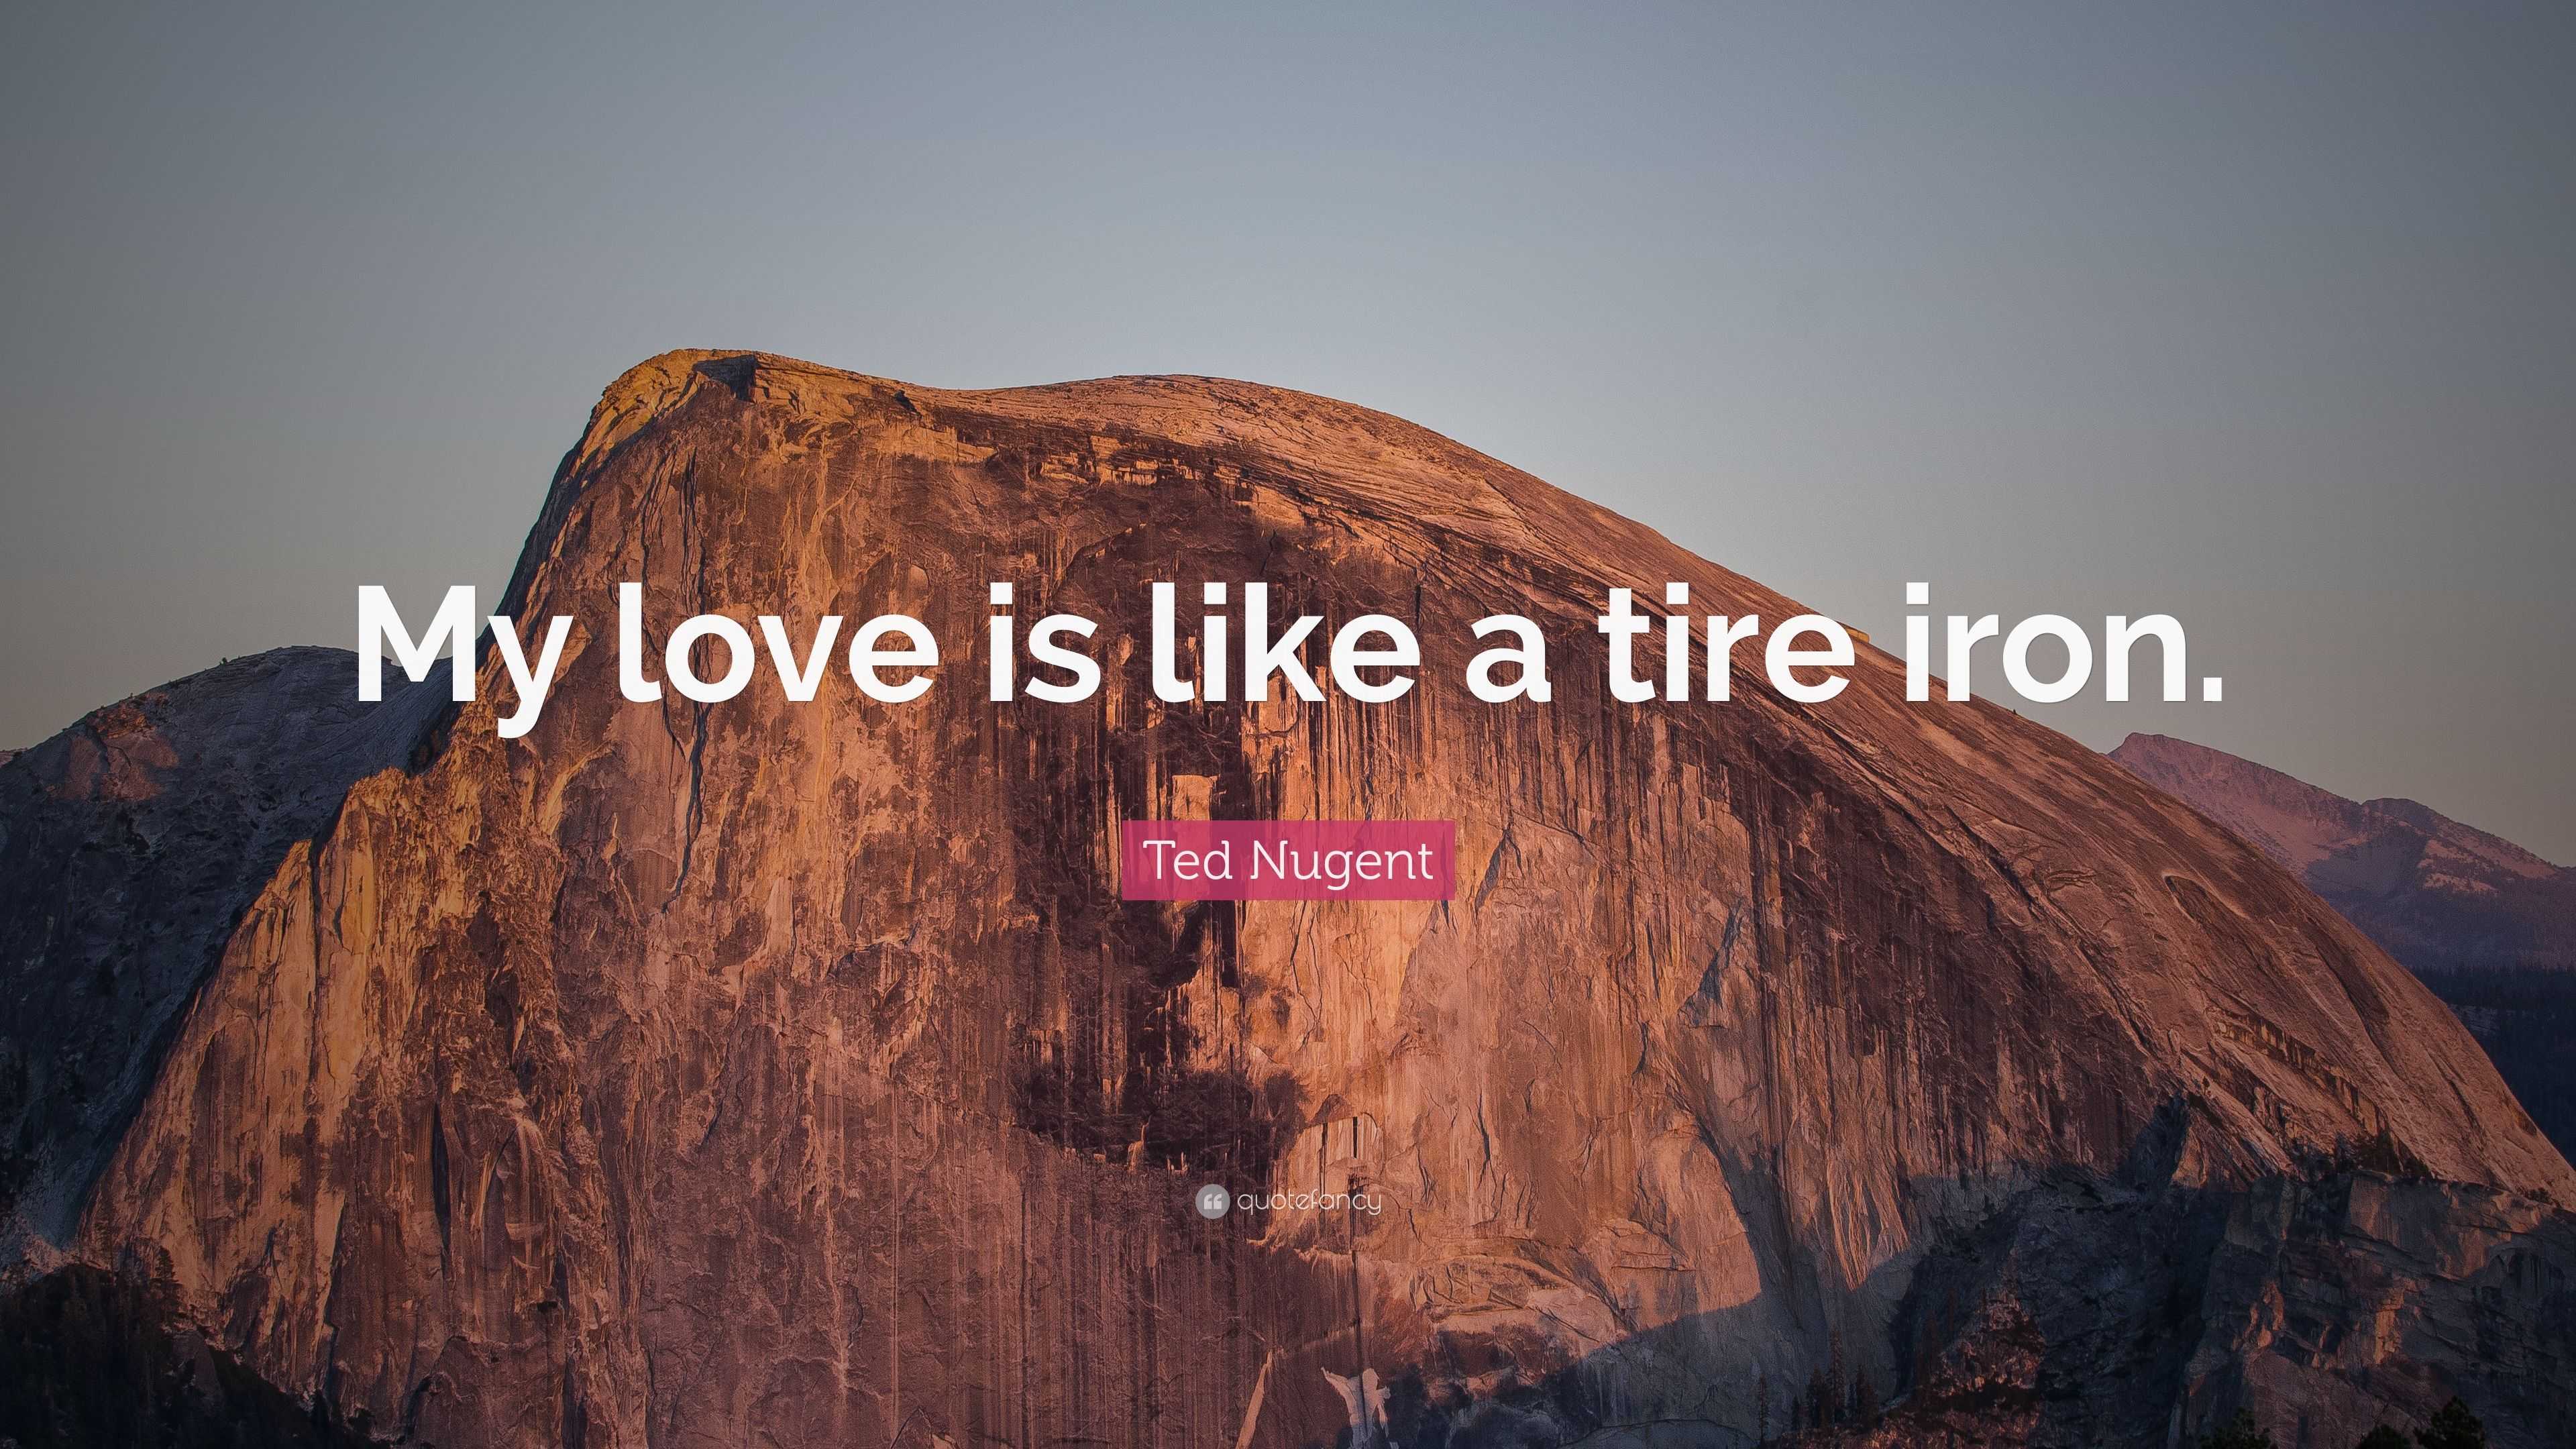 Ted Nugent Quote “My love is like a tire iron ”